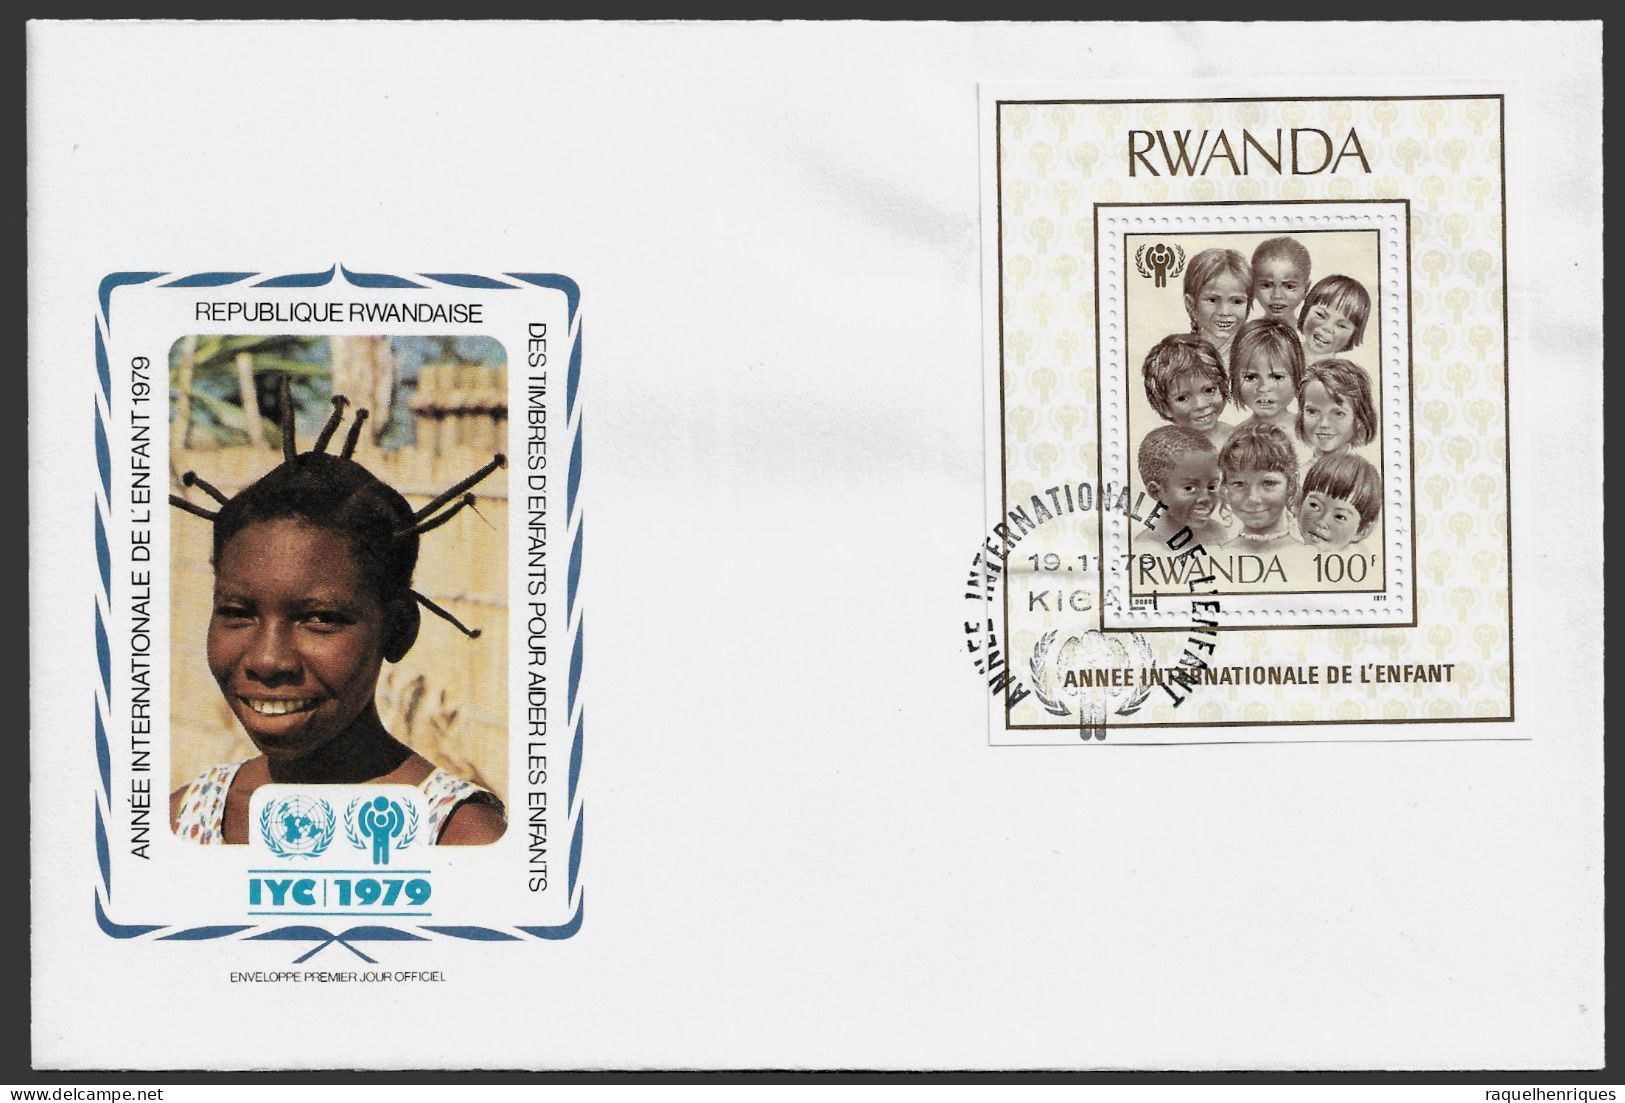 RWANDA FDC COVER - 1979 International Year Of The Child - MINISHEET FDC (FDC79#03) - Lettres & Documents